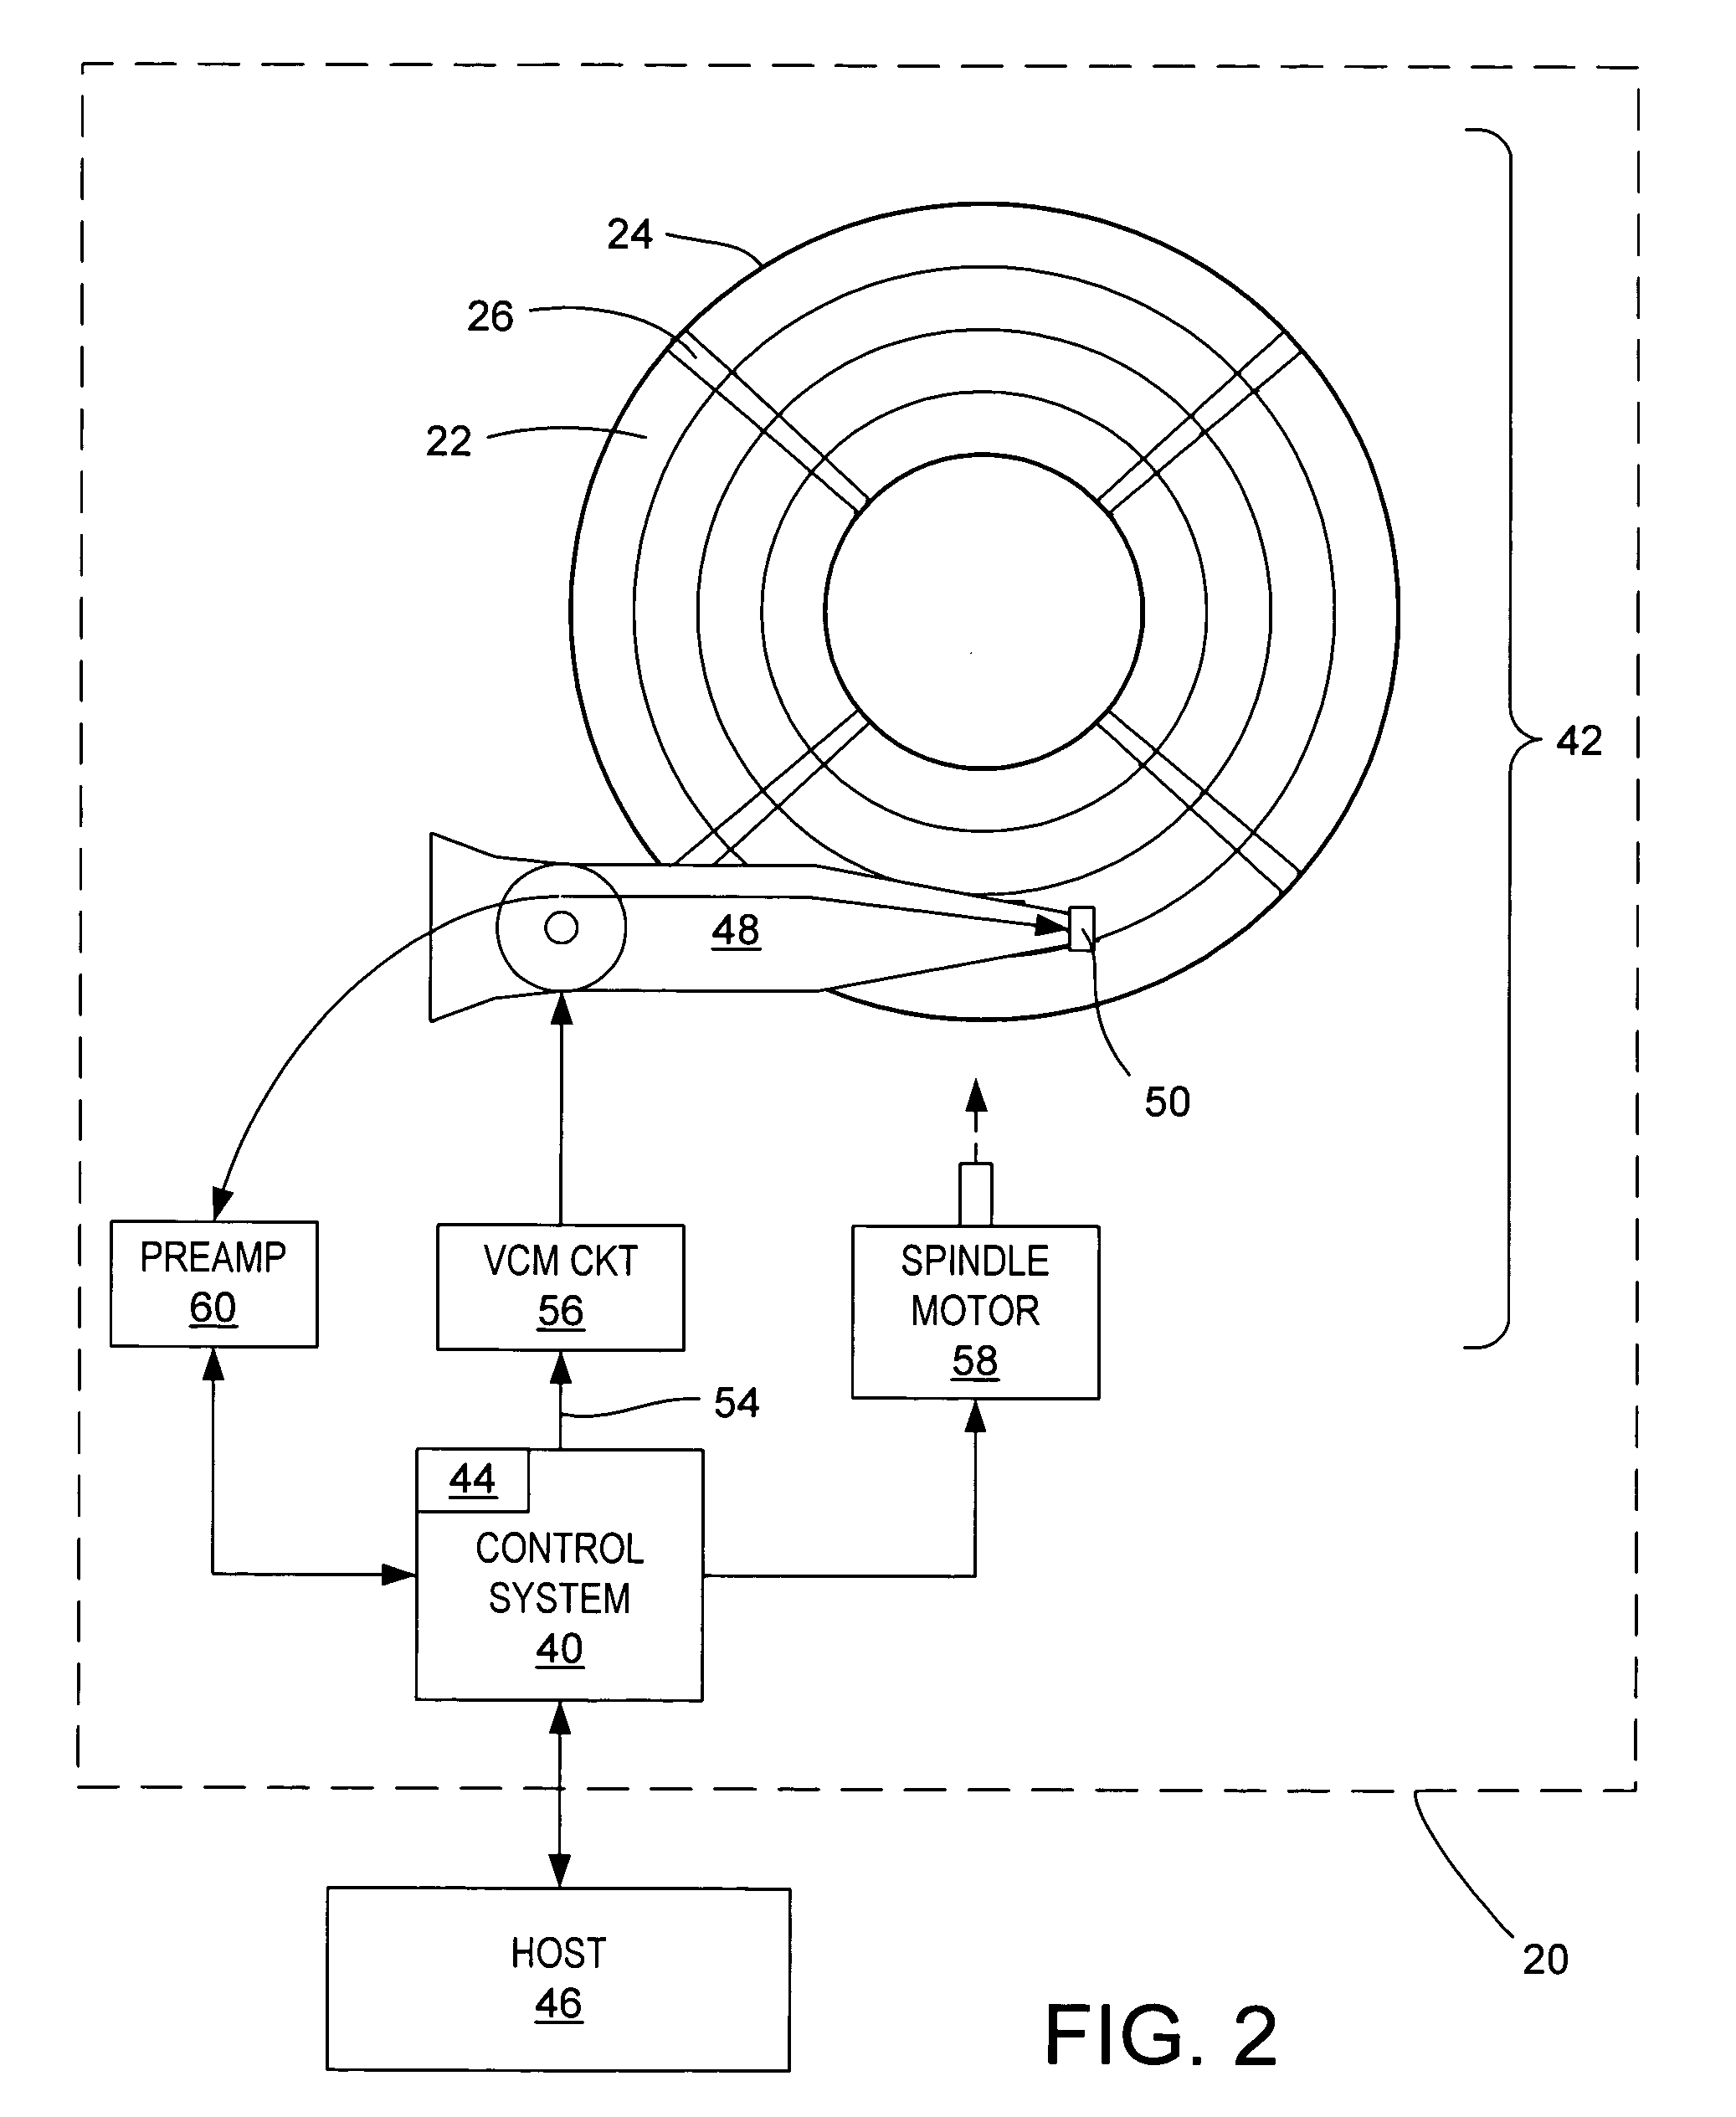 Method for preventing radial error propagation during self-servowriting of tracks in a magnetic disk drive